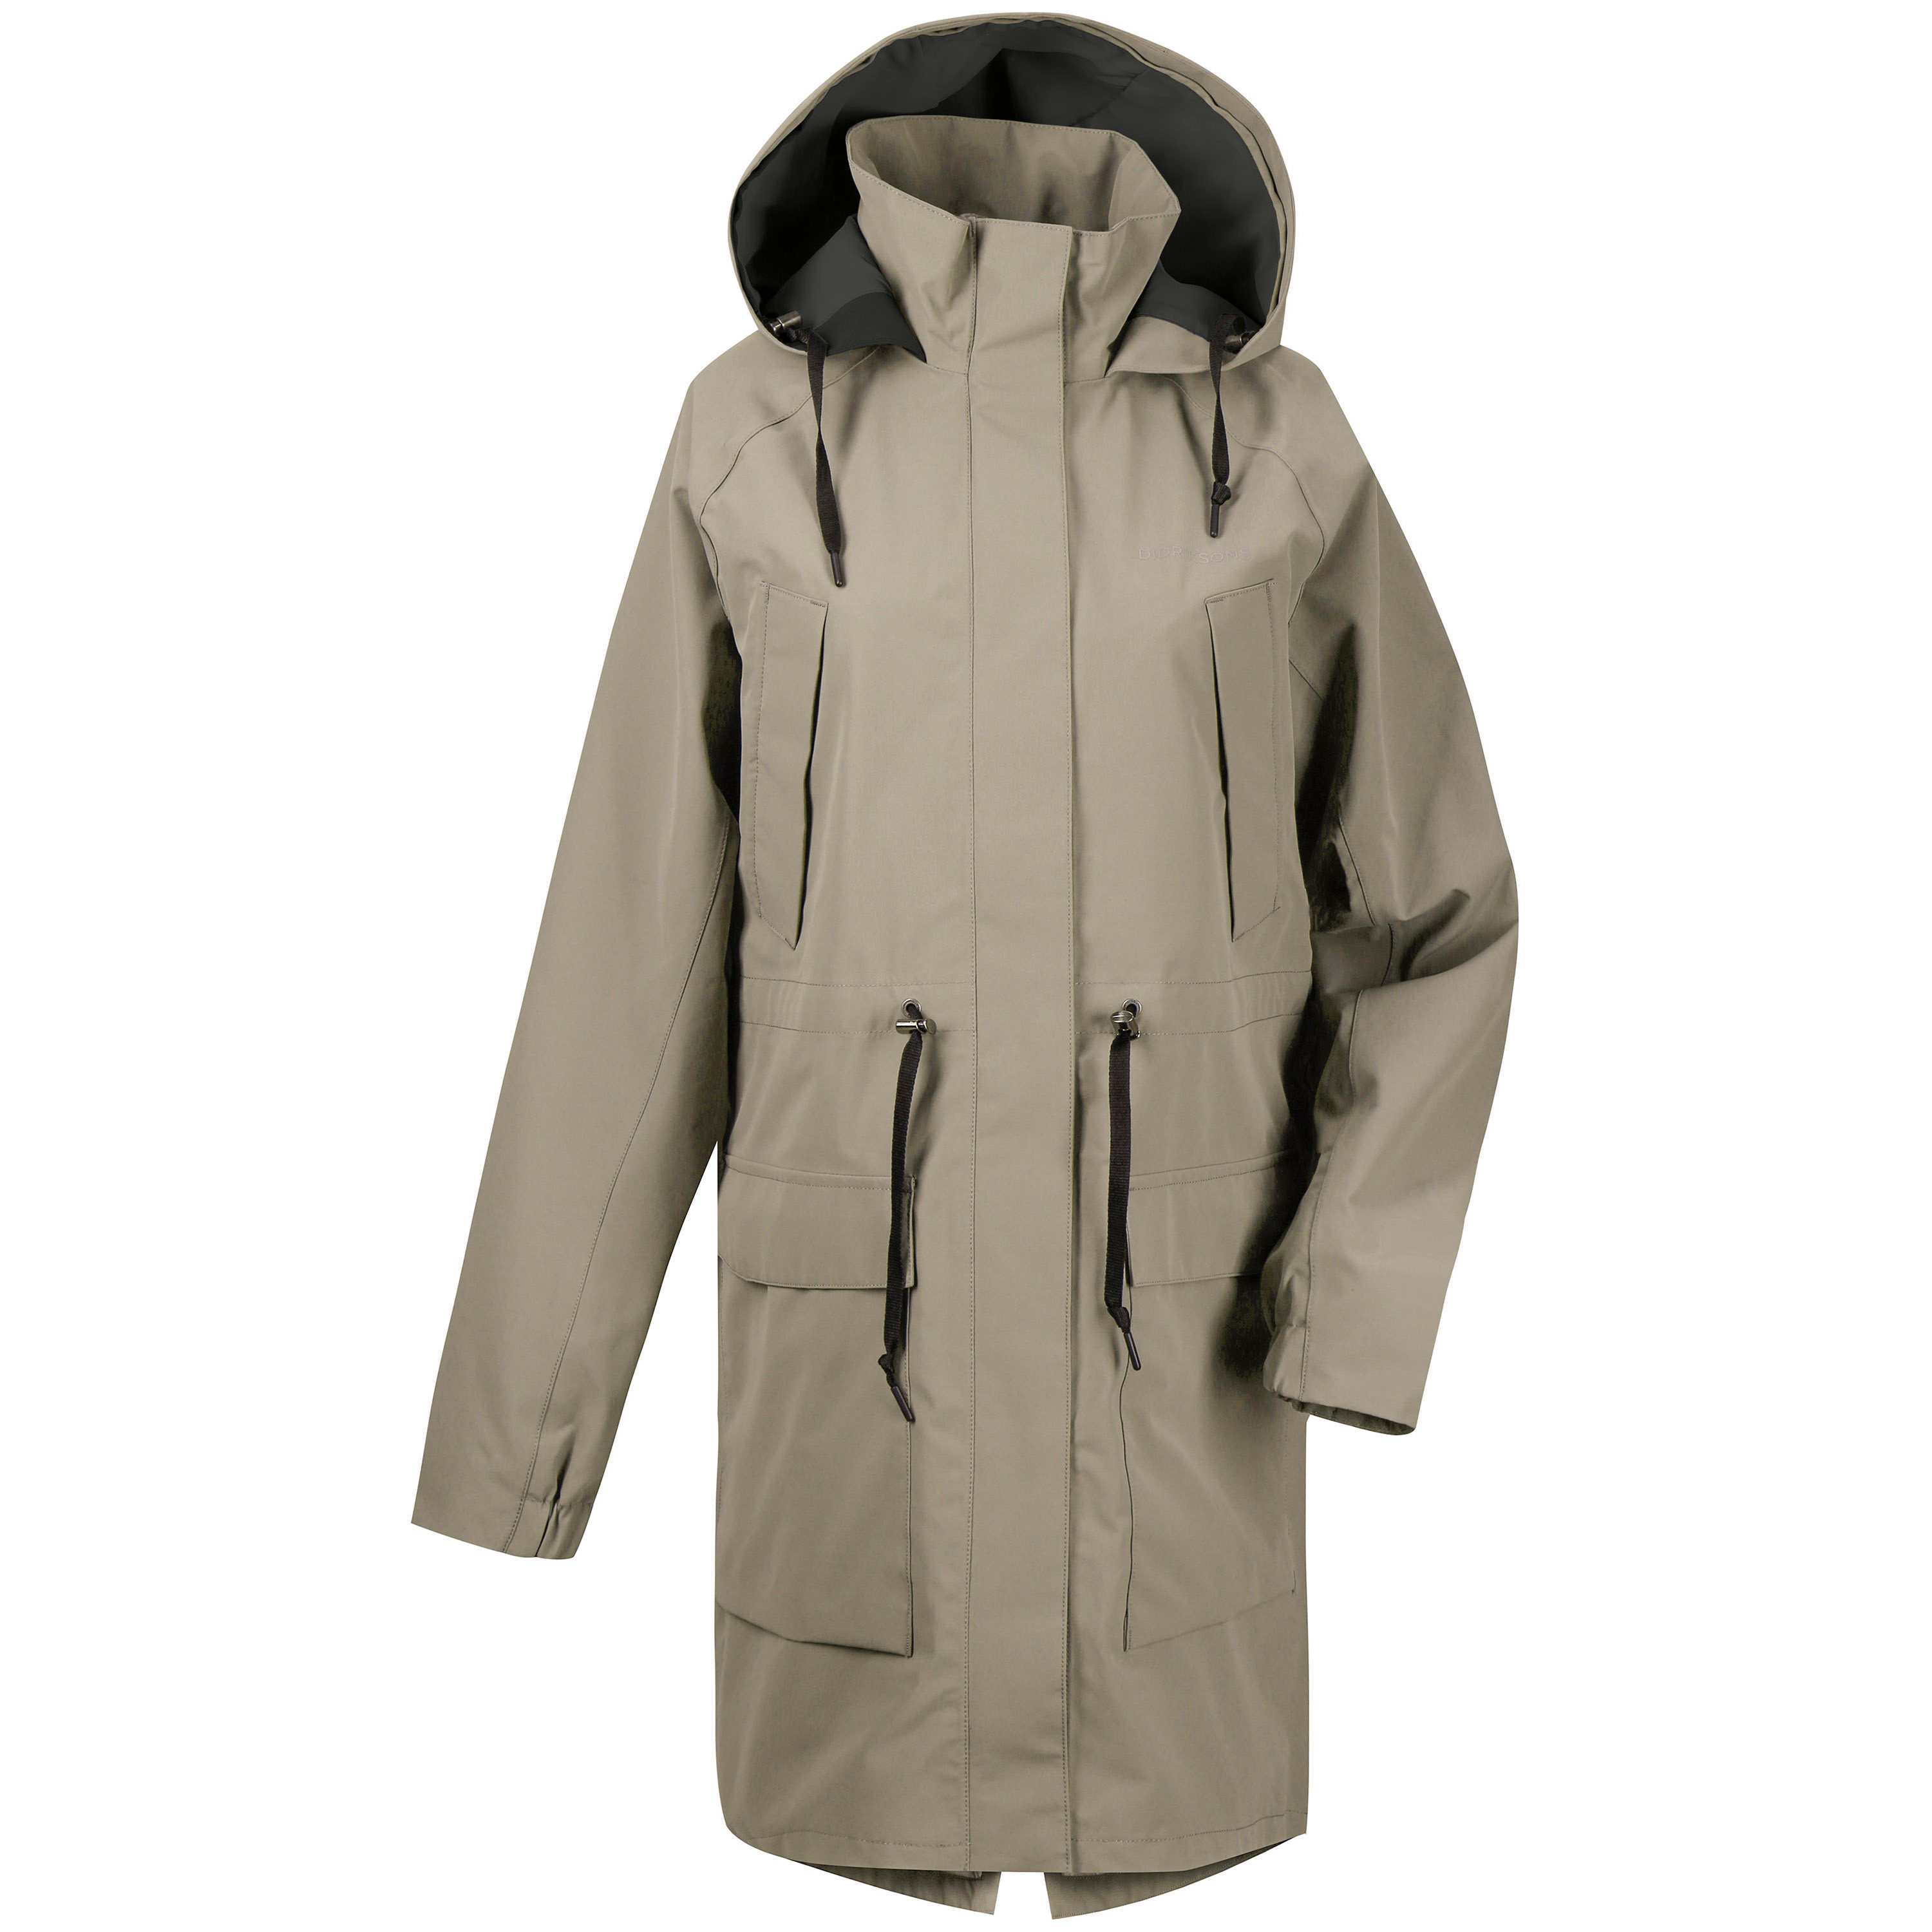 Buy Didriksons Clara Women's Parka from Outnorth